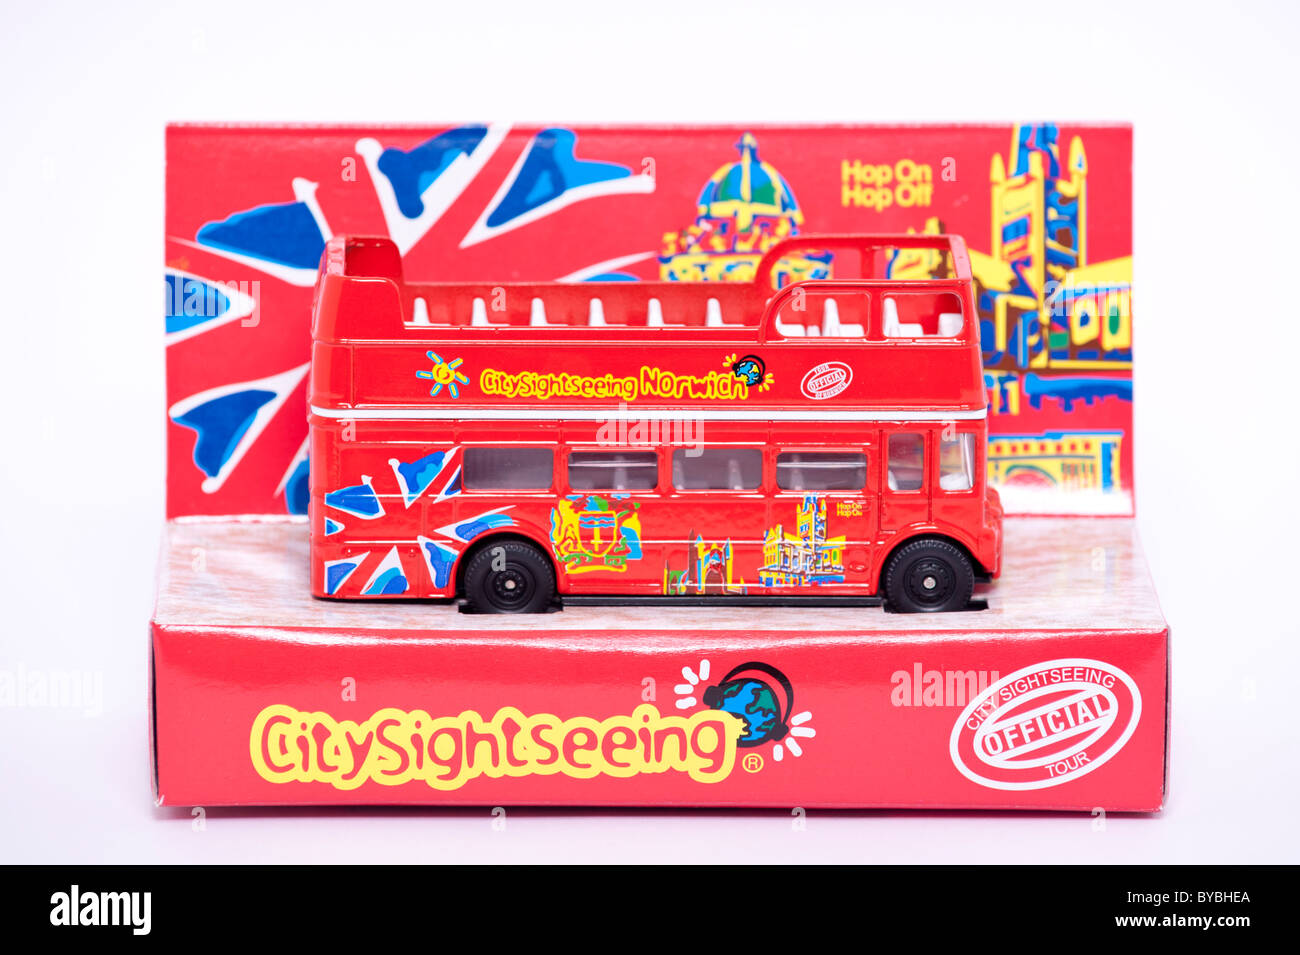 A toy model double decker bus on a white background Stock Photo